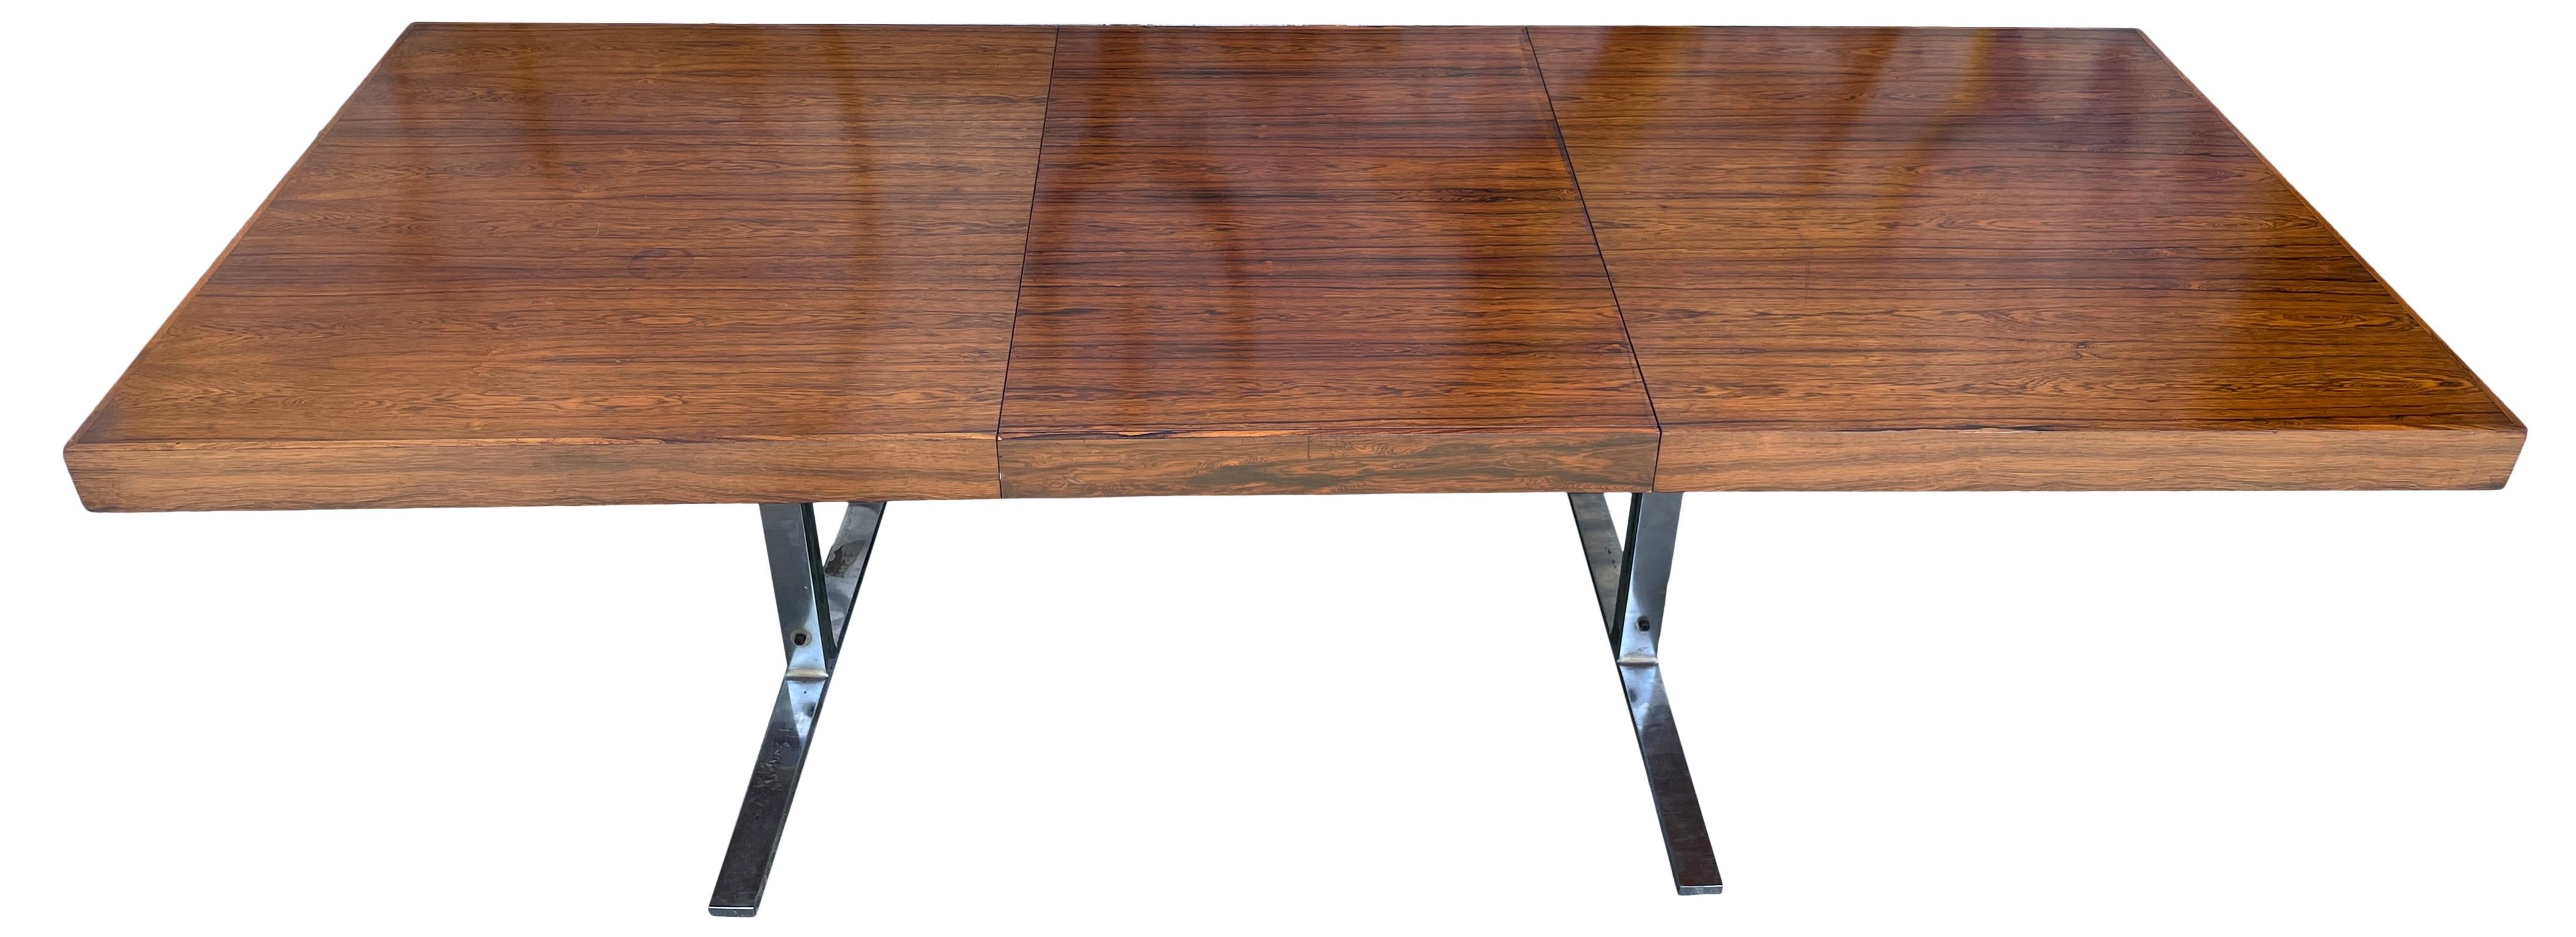 Stunning MidCentury Minimalist Rosewood Dining Table 1 Leaf by Georg Petersens For Sale 3